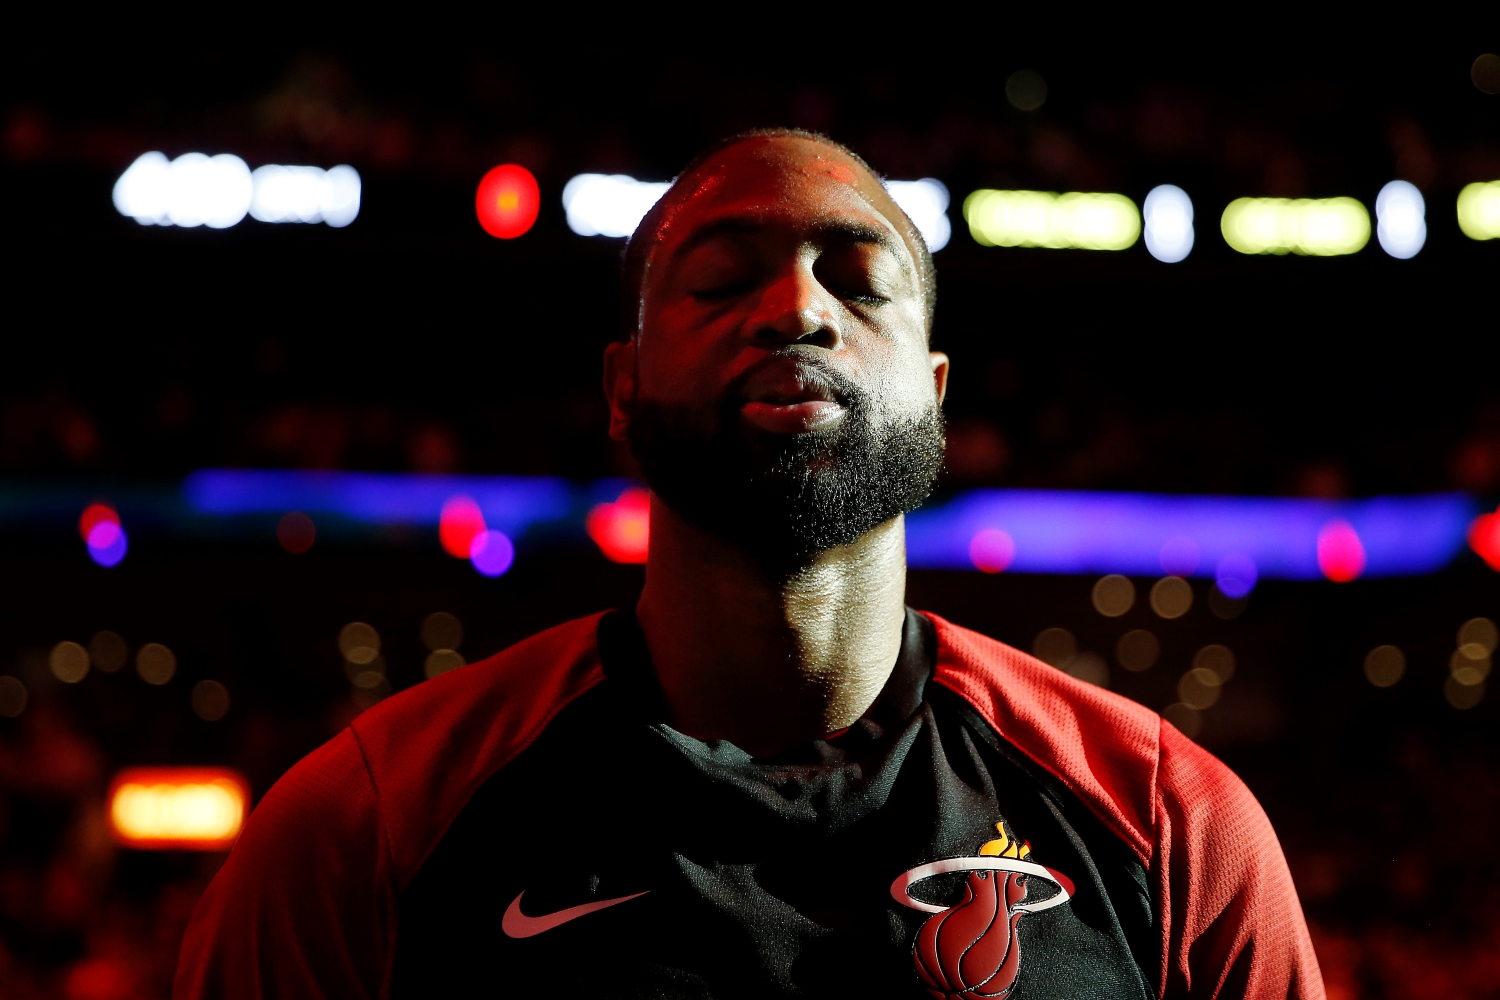 Dwyane Wade of the Miami Heat looks on during the playing of the national anthem prior to an NBA game.